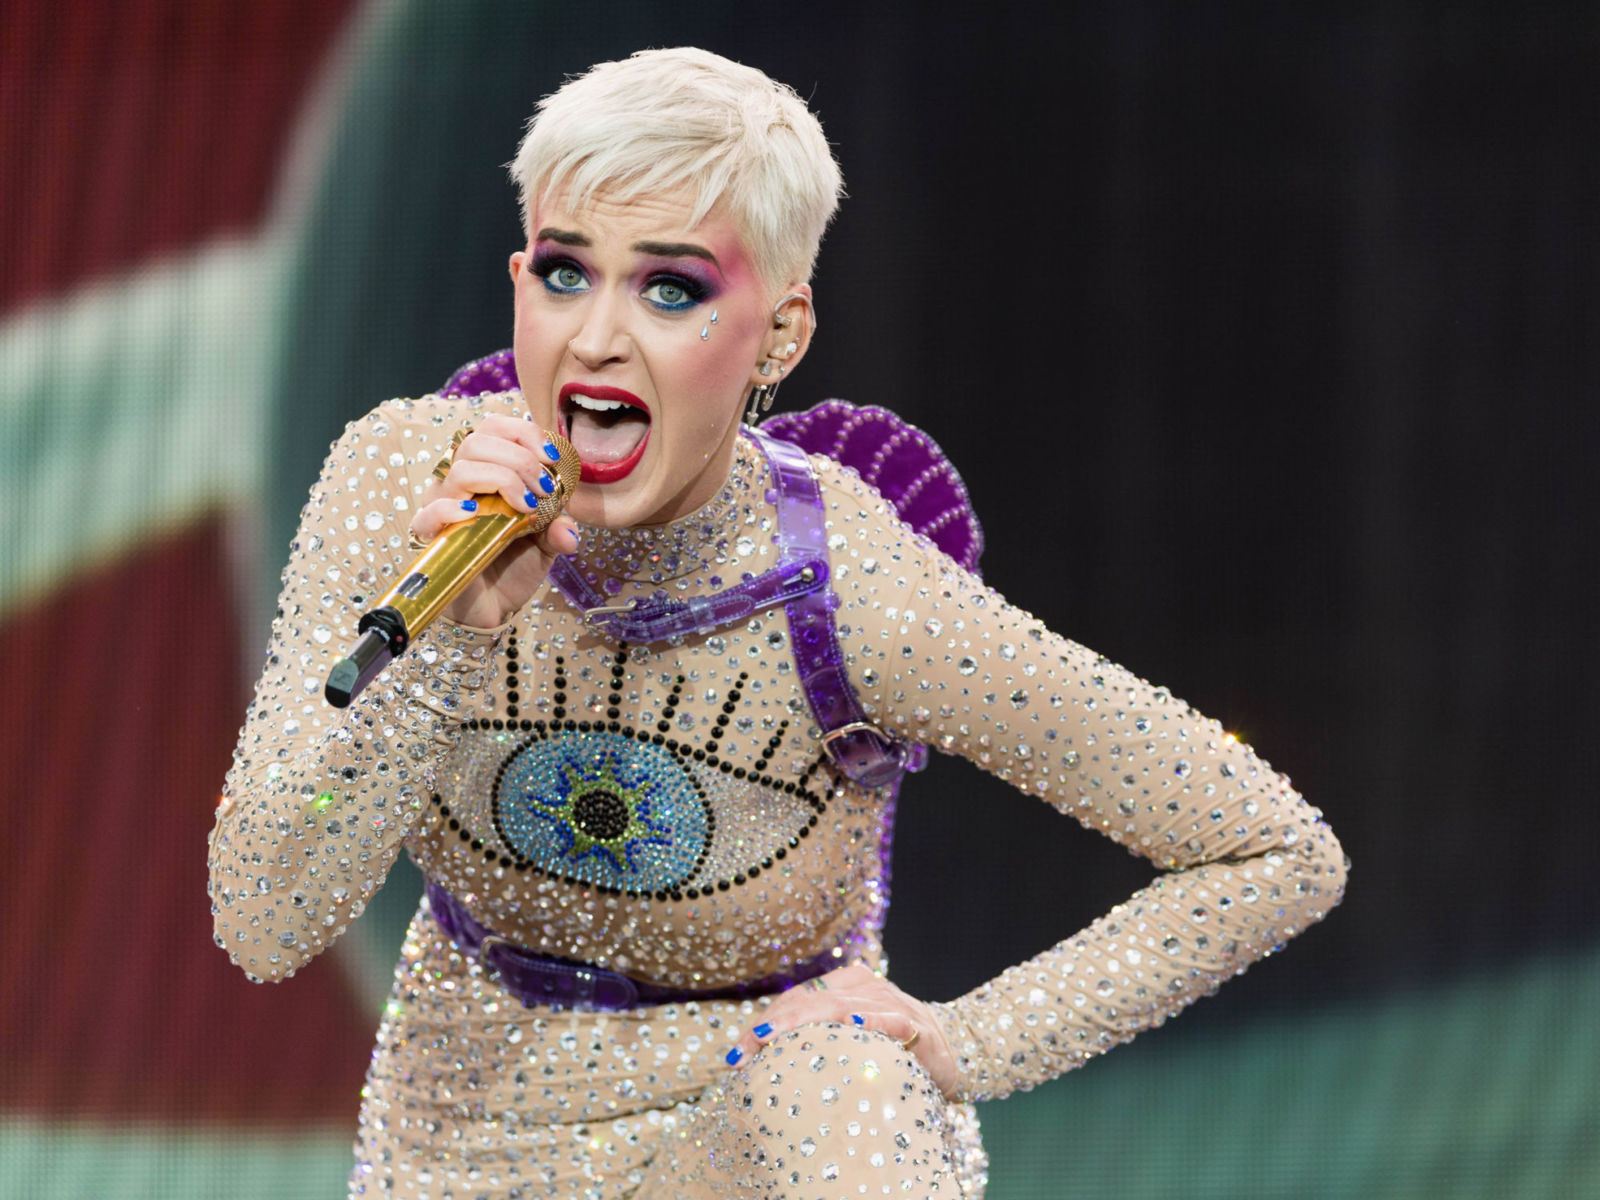 Katy Perry wins millions in battle with nuns